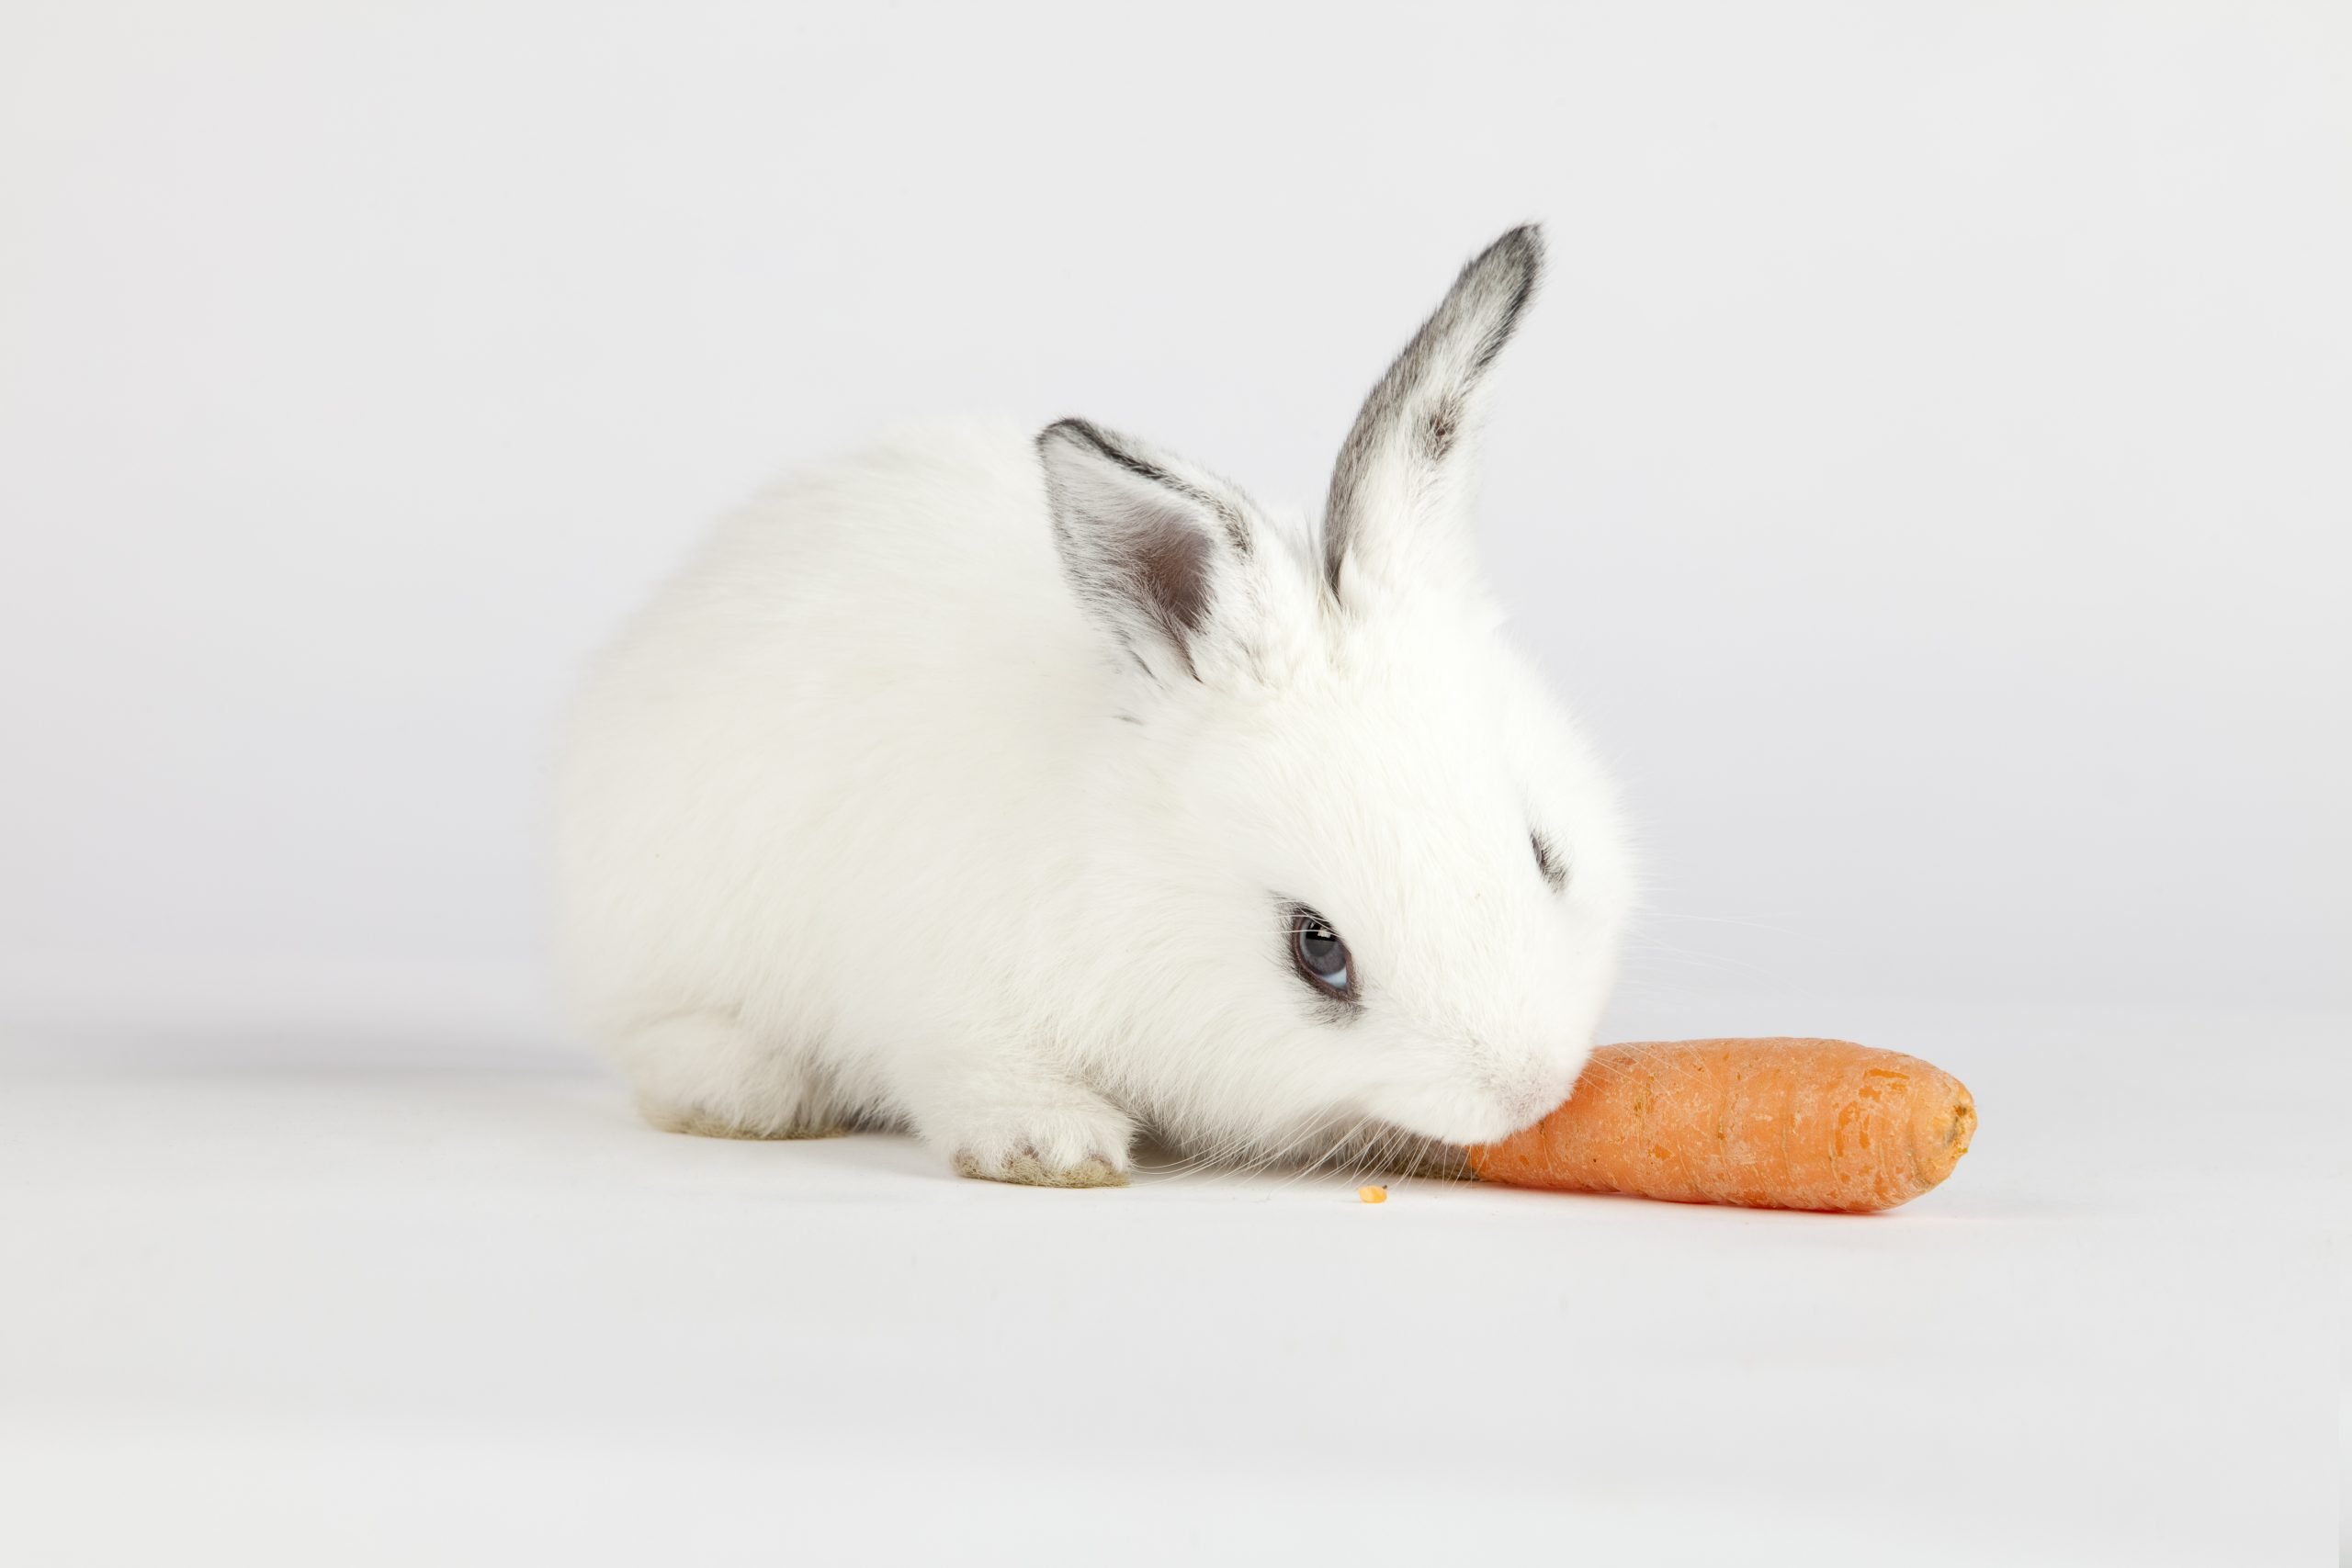 Can Rabbits Eat Carrots? - Every Bunny Welcome